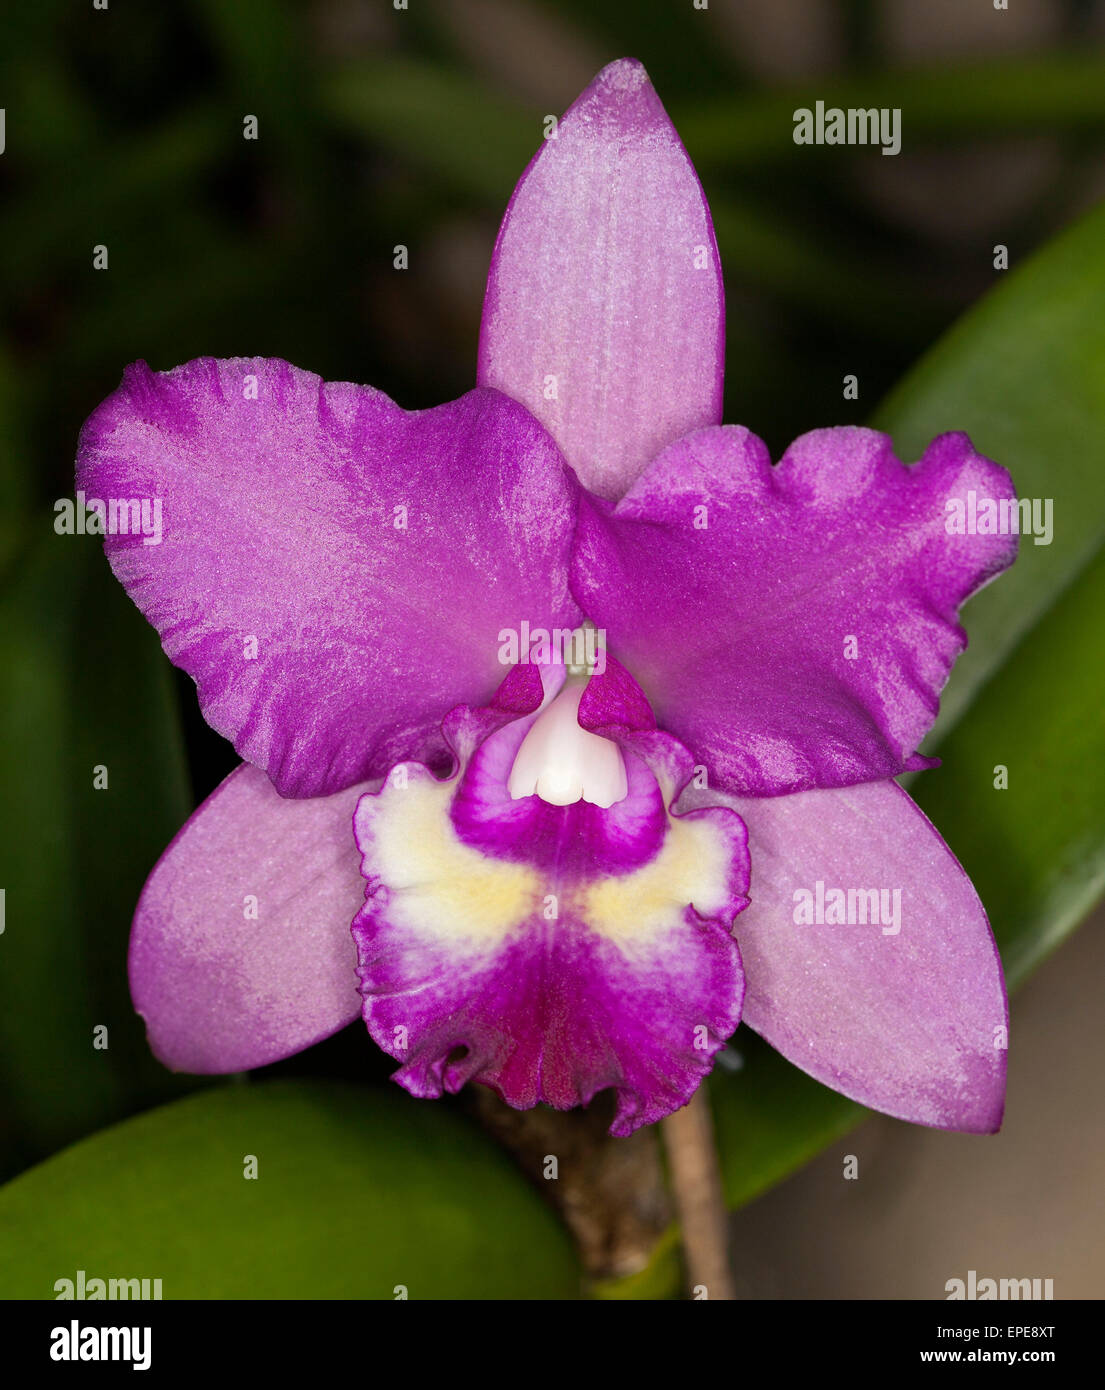 Spectacular vivid purple flower of Cattleya orchid cultivar Narooma x Deception Drop 'Copper and Spots' on dark green background Stock Photo